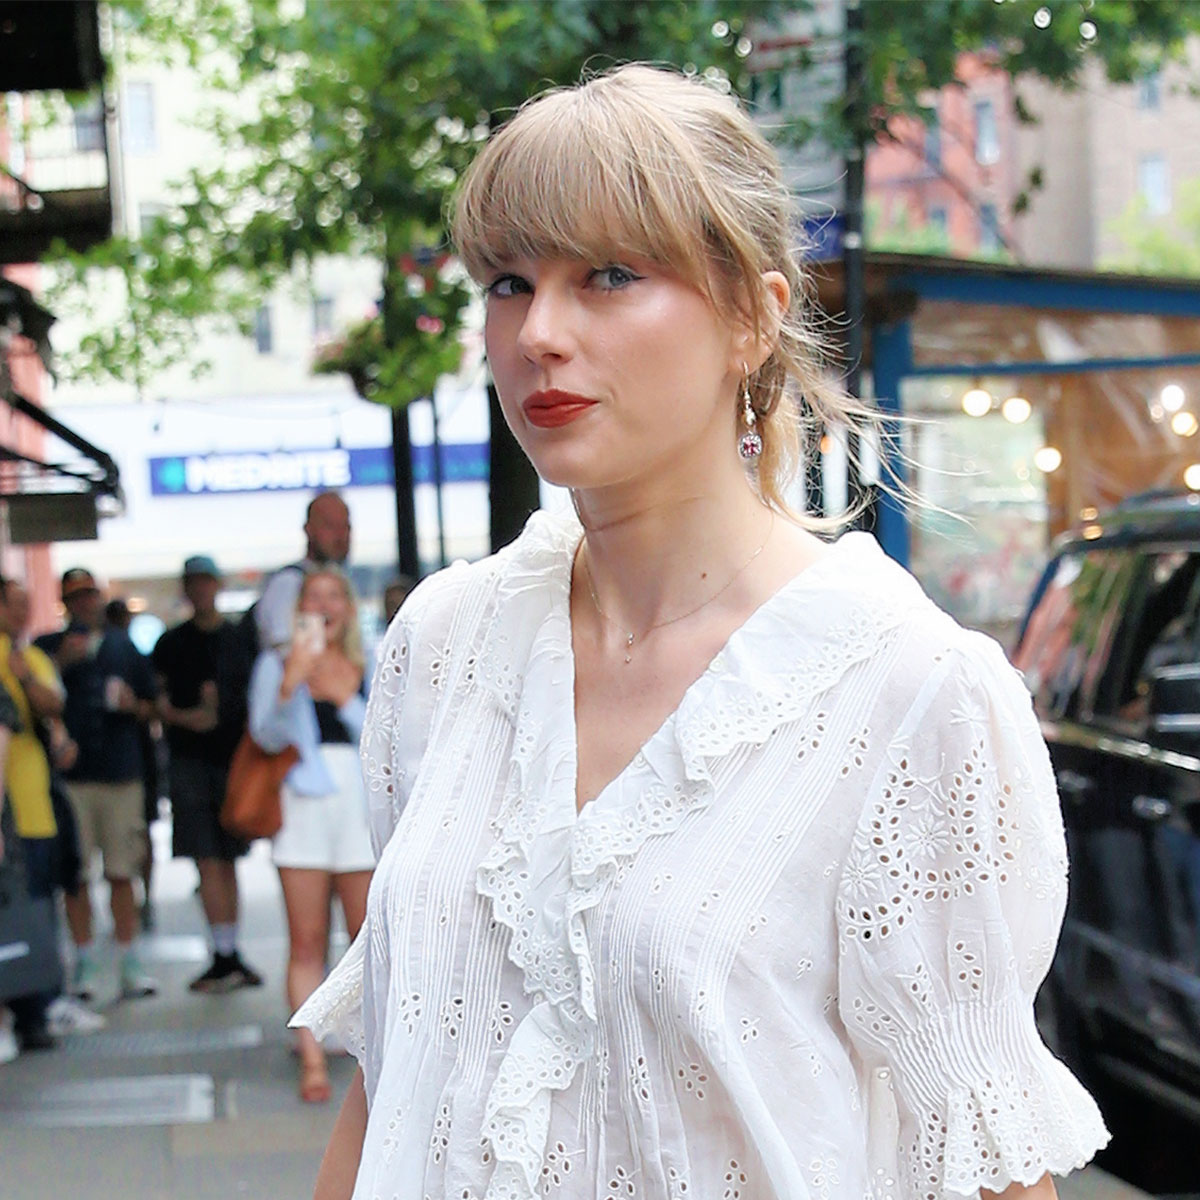 Taylor Swift Rocks The No-Pants Trend In Knee-High Boots & Oversized  Minidress With Friends In NYC - SHEfinds